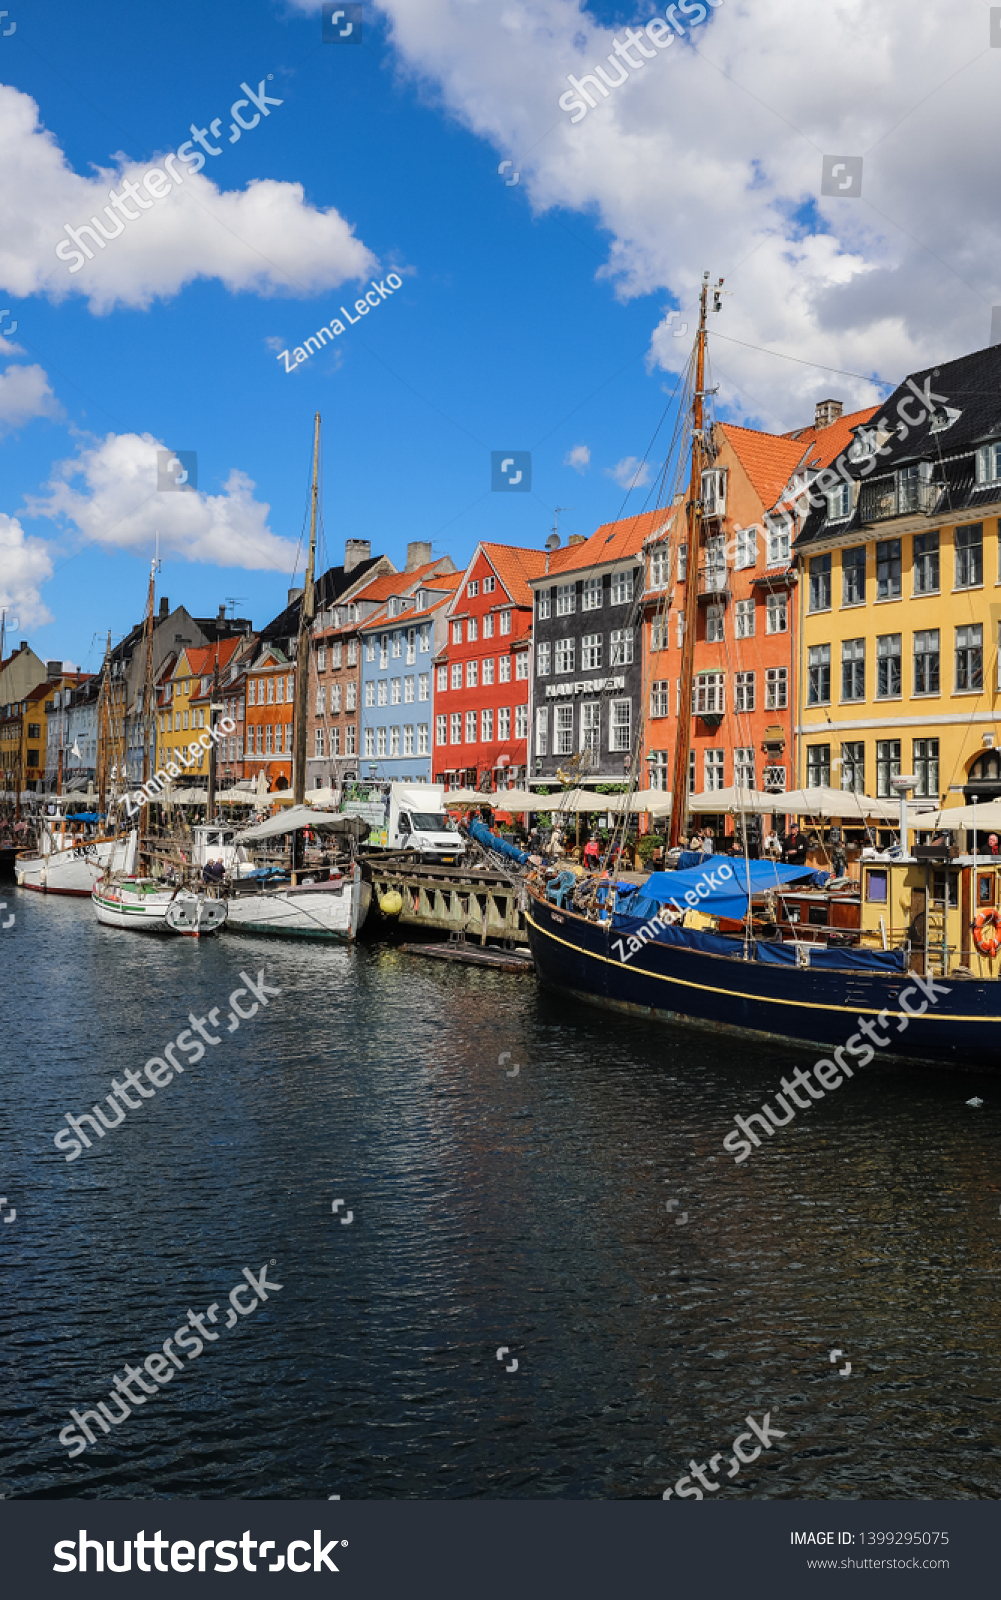 COPENHAGEN, DENMARK - May 13, 2019 : Colorful historical houses and old wooden boats located on the canal of famous Nyhavn port, on a sunny day #1399295075